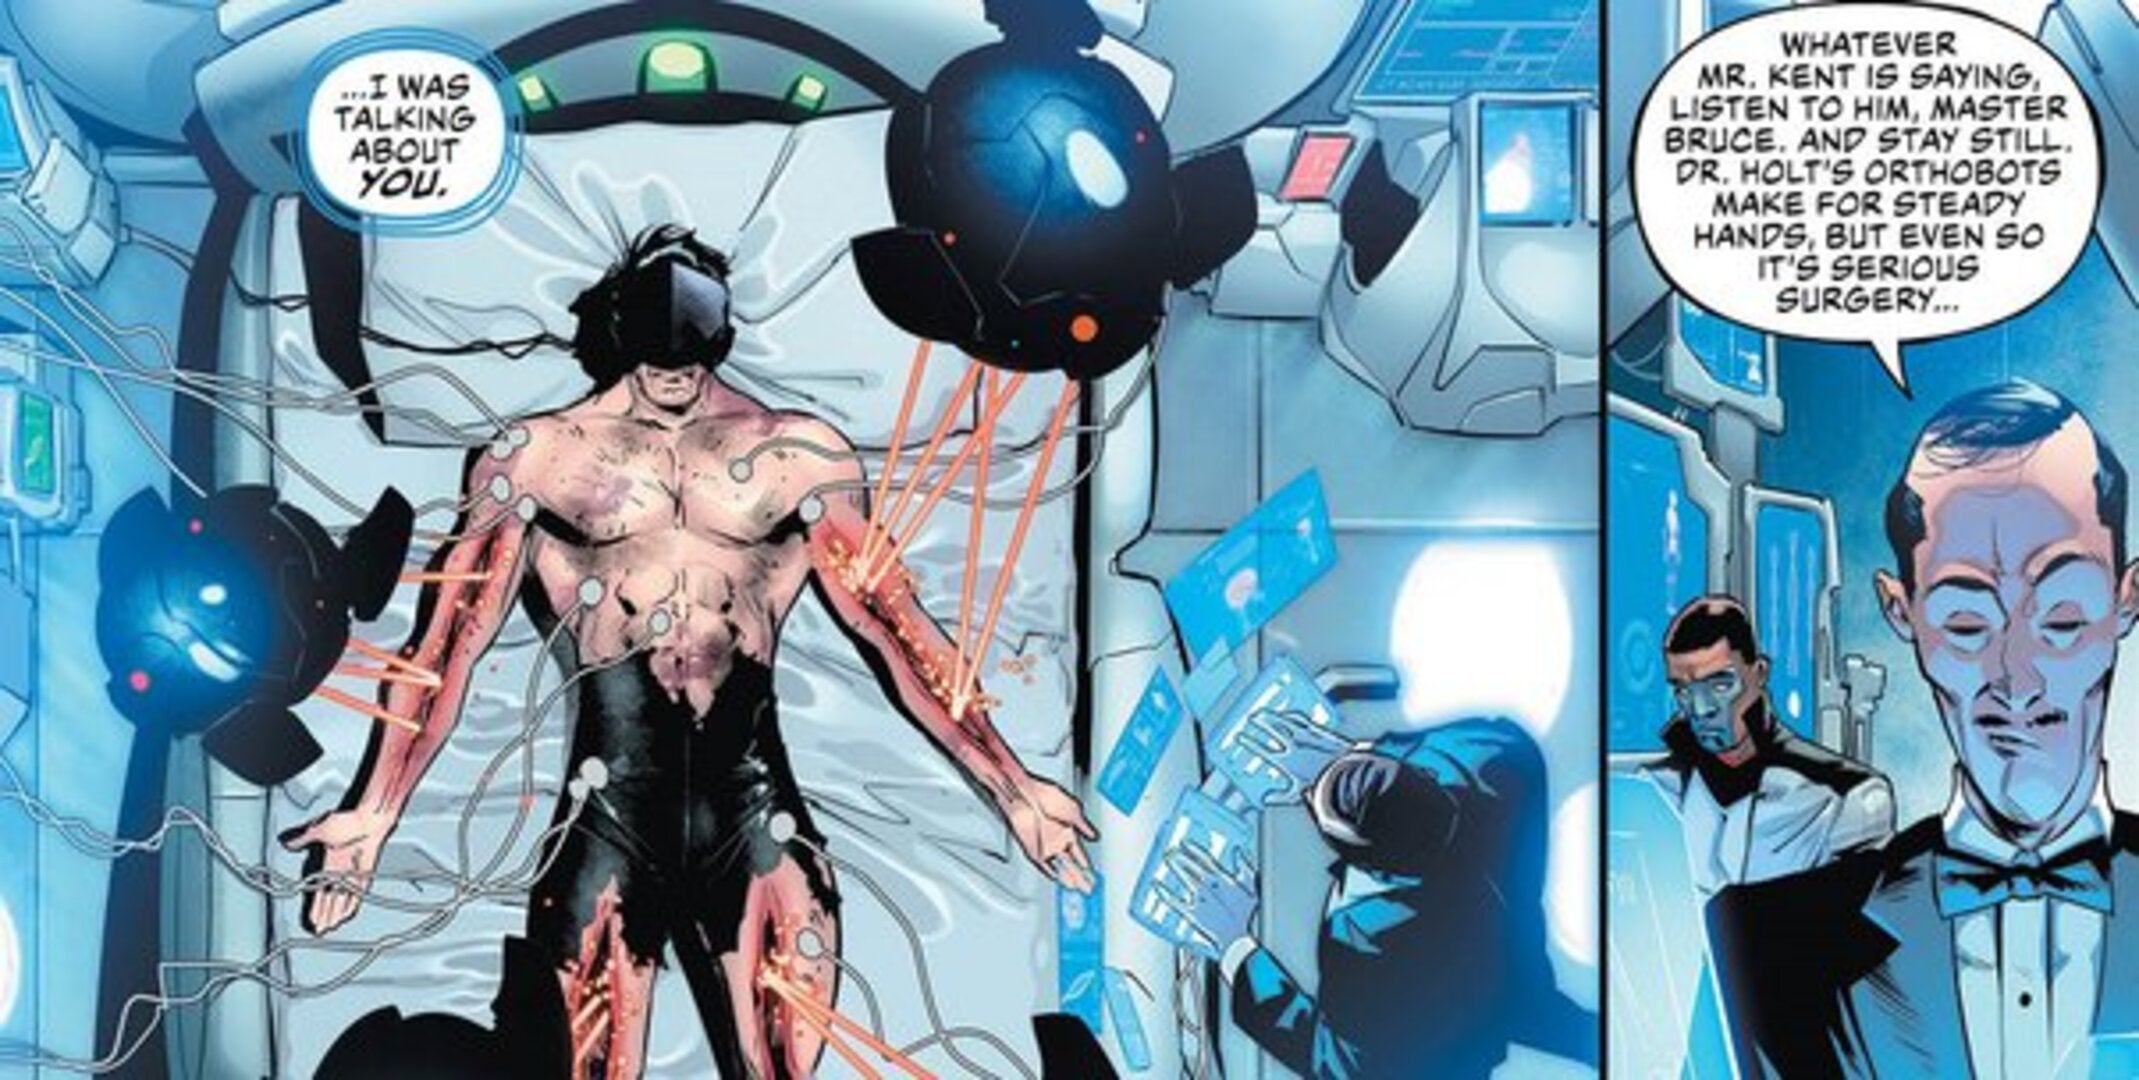 Interior comics panels featuring Batman healing with the help of technology